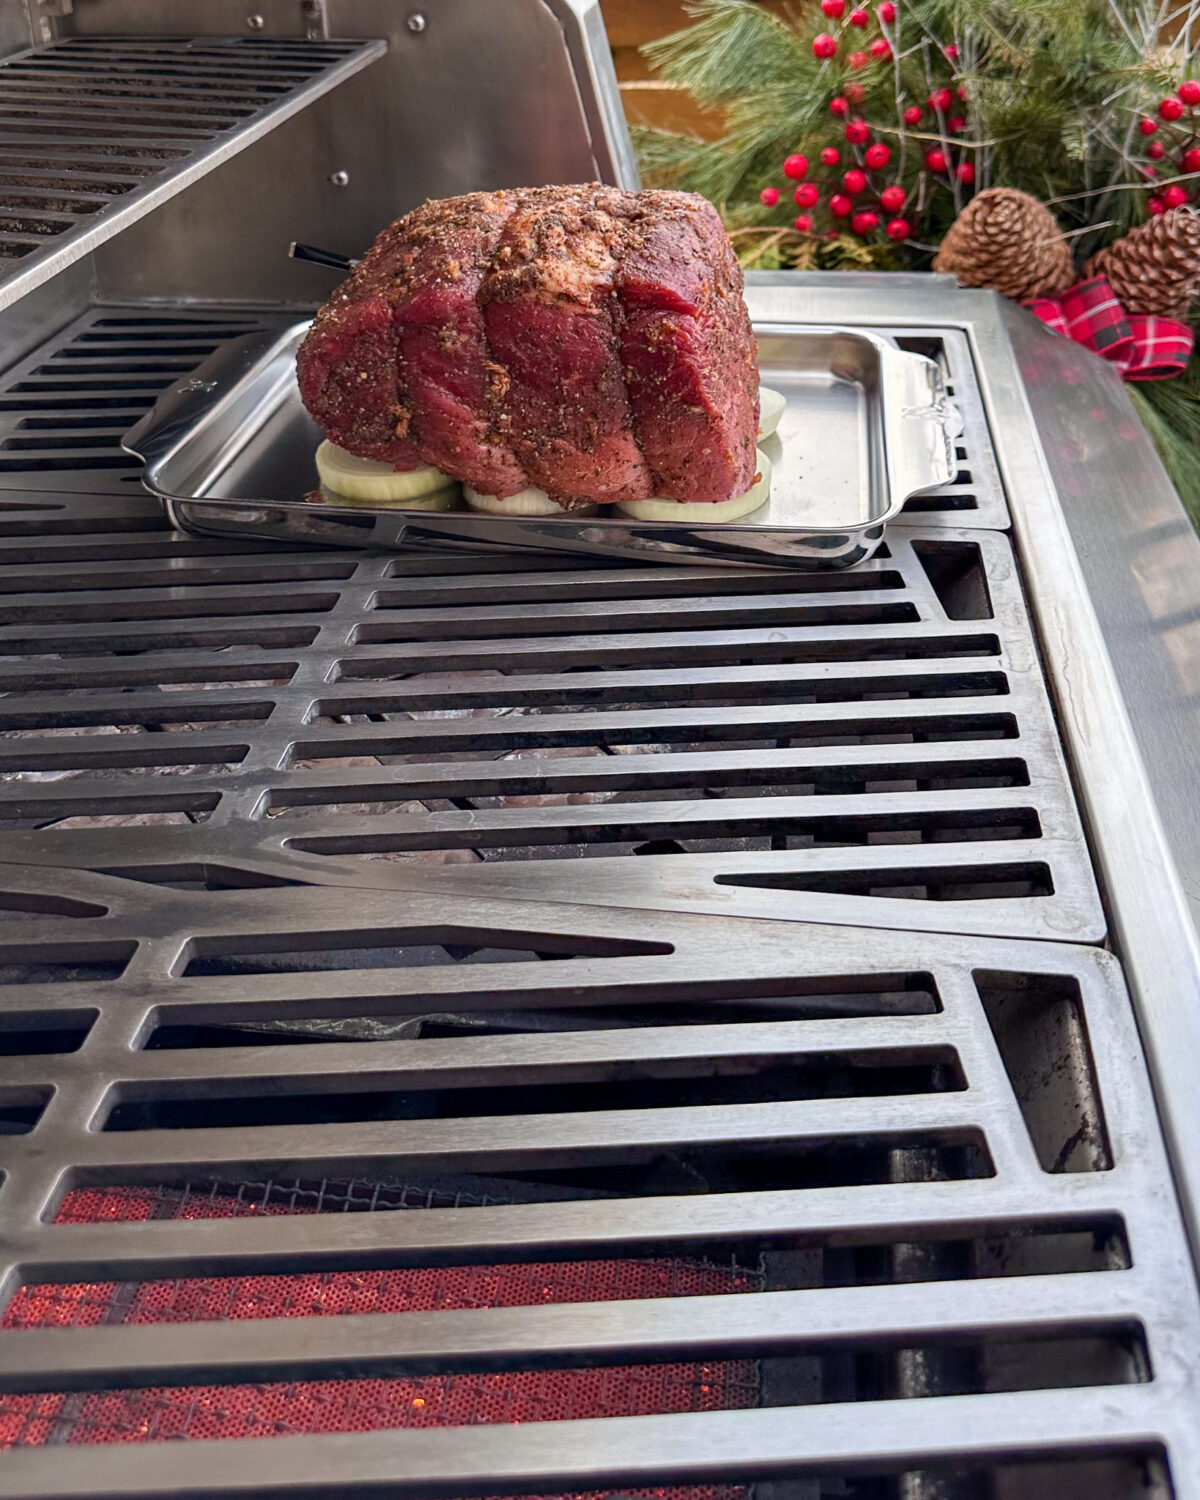 Place the roast on the indirect side of the grill.